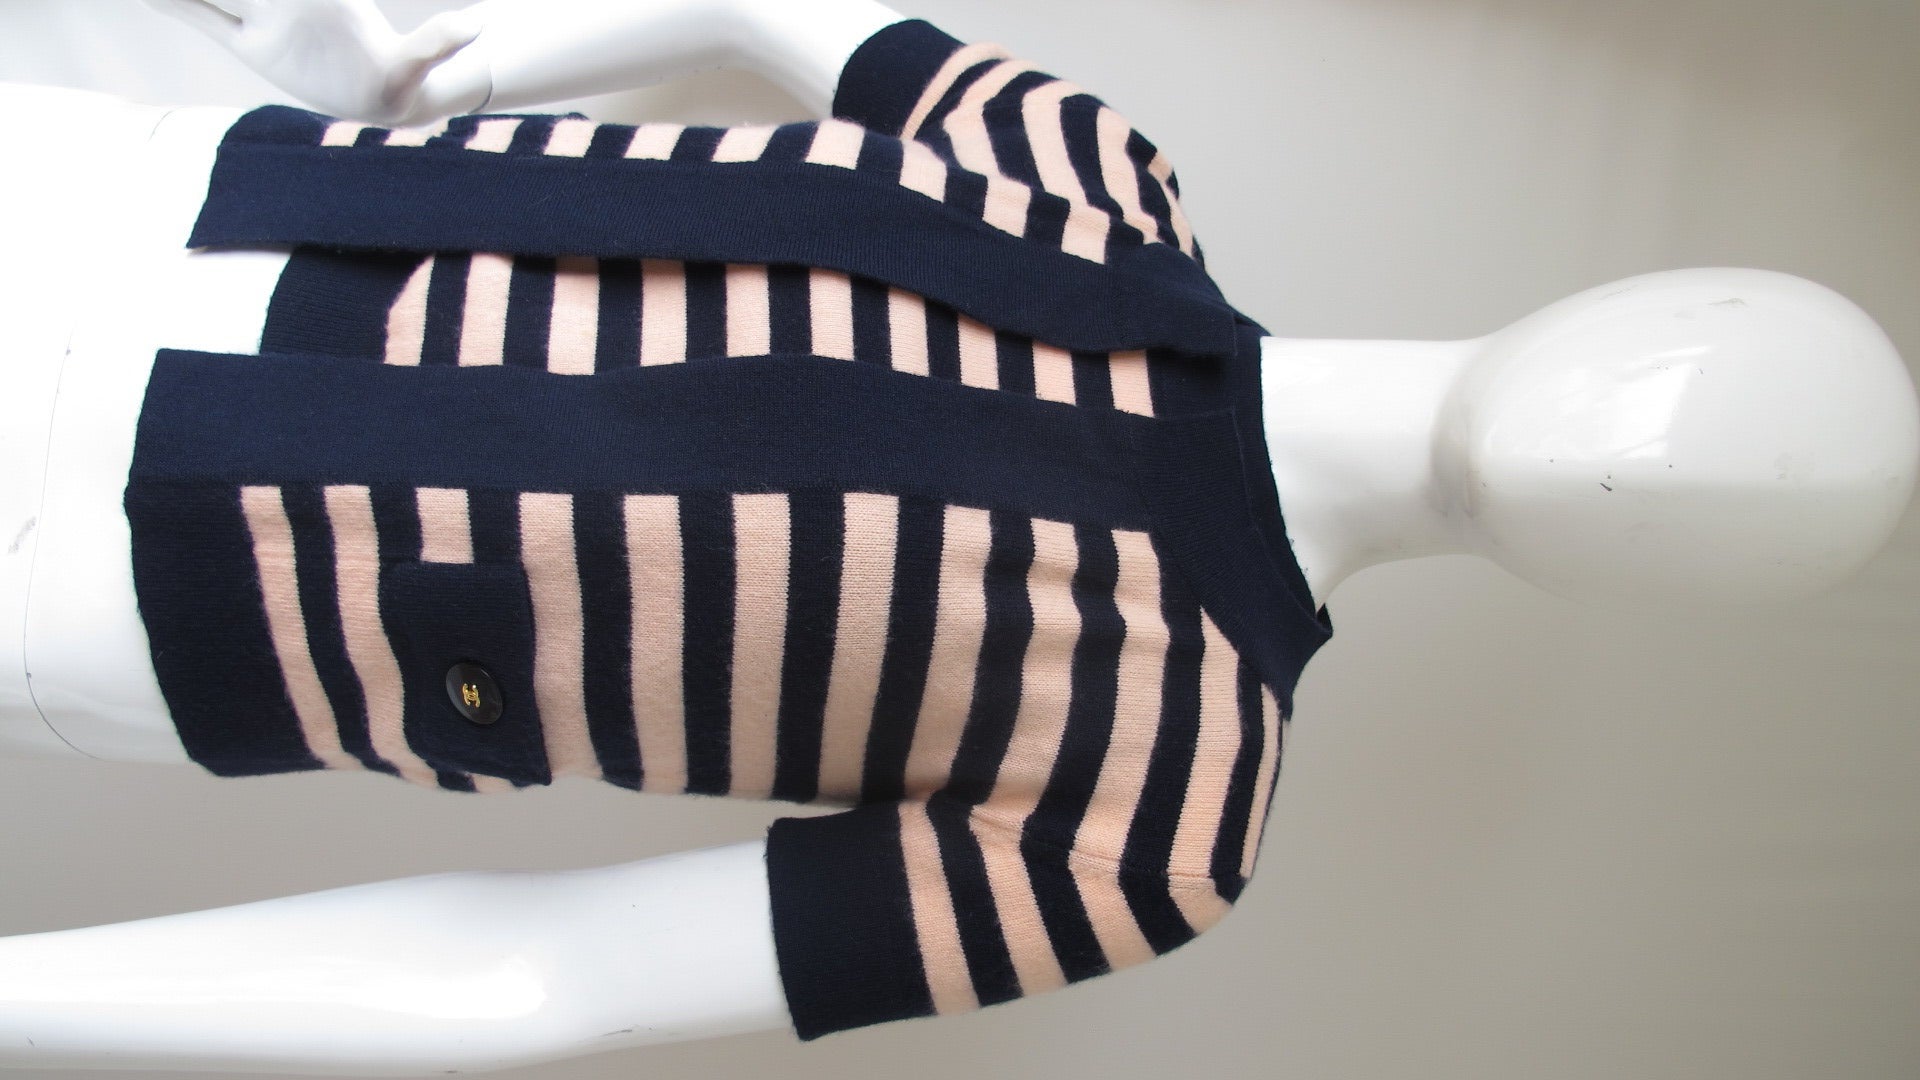 A 1997C Chanel 100% cashmere navy blue and pink striped short-sleeved twinset trimmed with bands of two-inch navy cashmere. The cardigan is open with two front pockets featuring gold on black CC logo buttons and the sleeveless sweater underneath